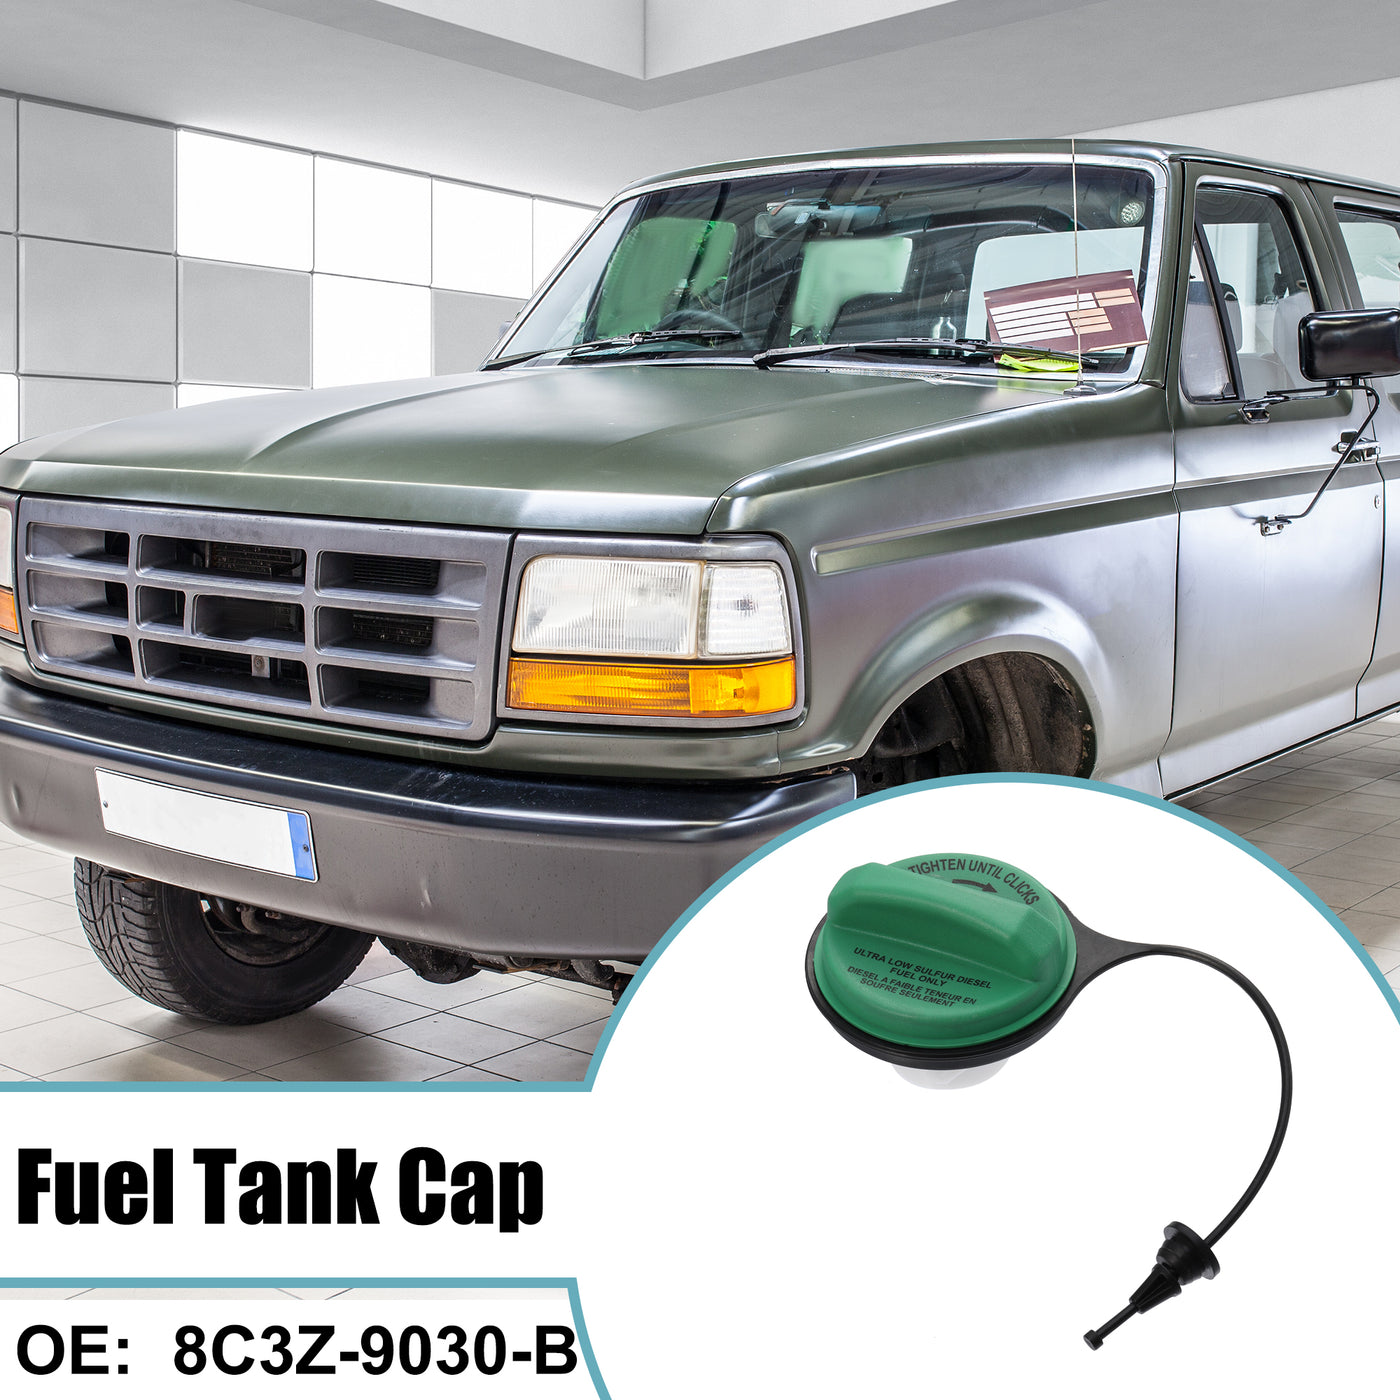 X AUTOHAUX 8C3Z-9030-B Fuel Tank Cover Door Fuel Tank Cover Replacement Accessories for Ford F-450 Super Duty 2008 for Ford F-550 Super Duty 2008